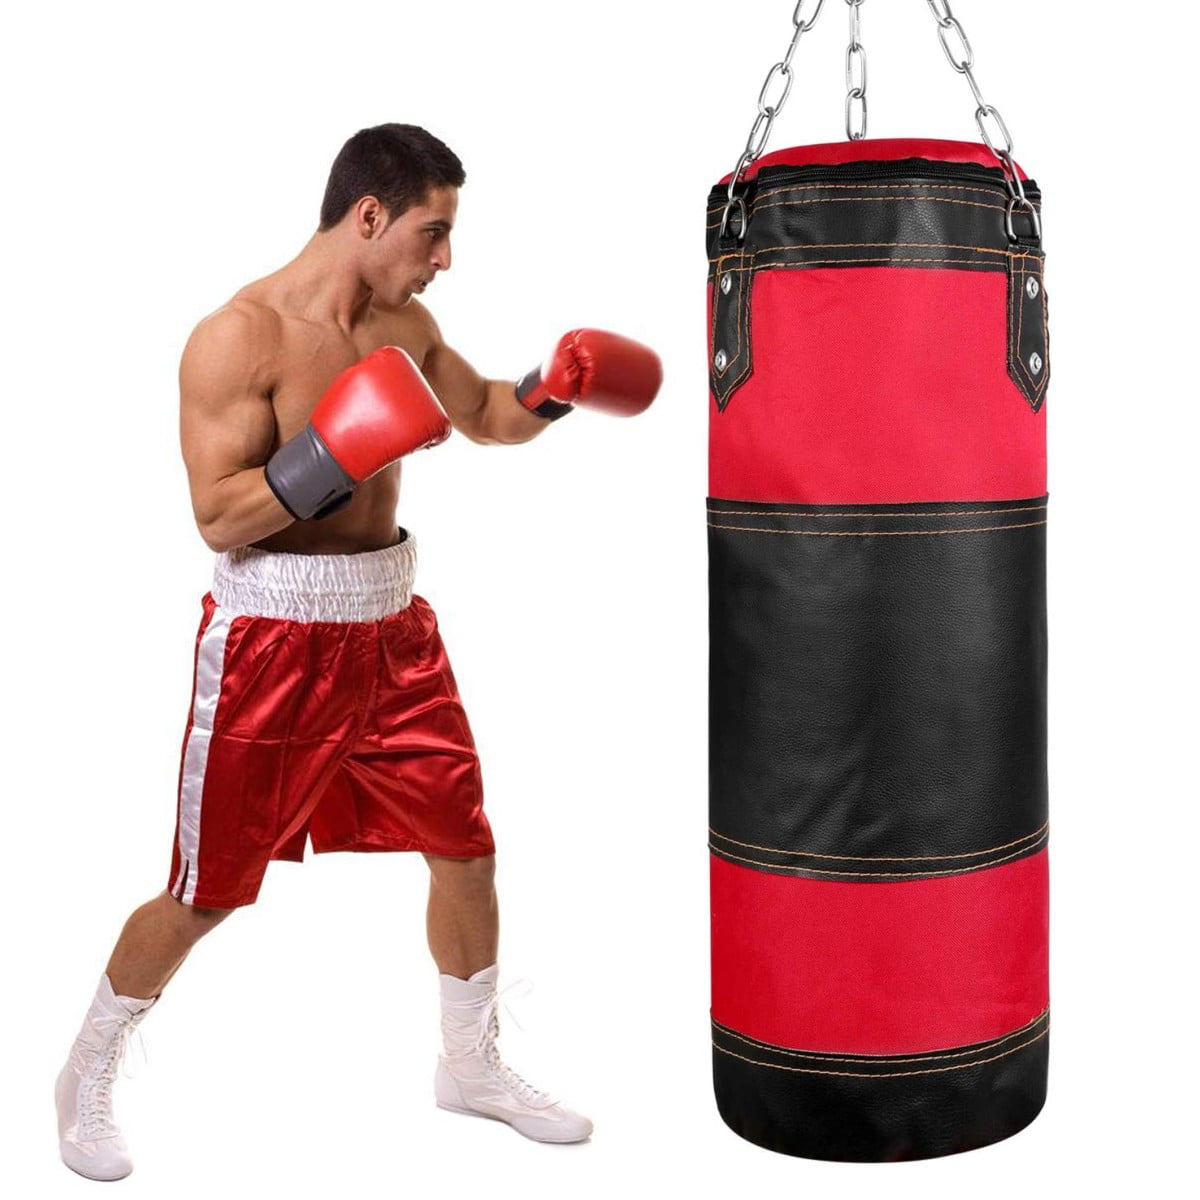 NEW Lonsdale Pro Leather Wall Mount Target Striking Punch Bag Boxing MMA 